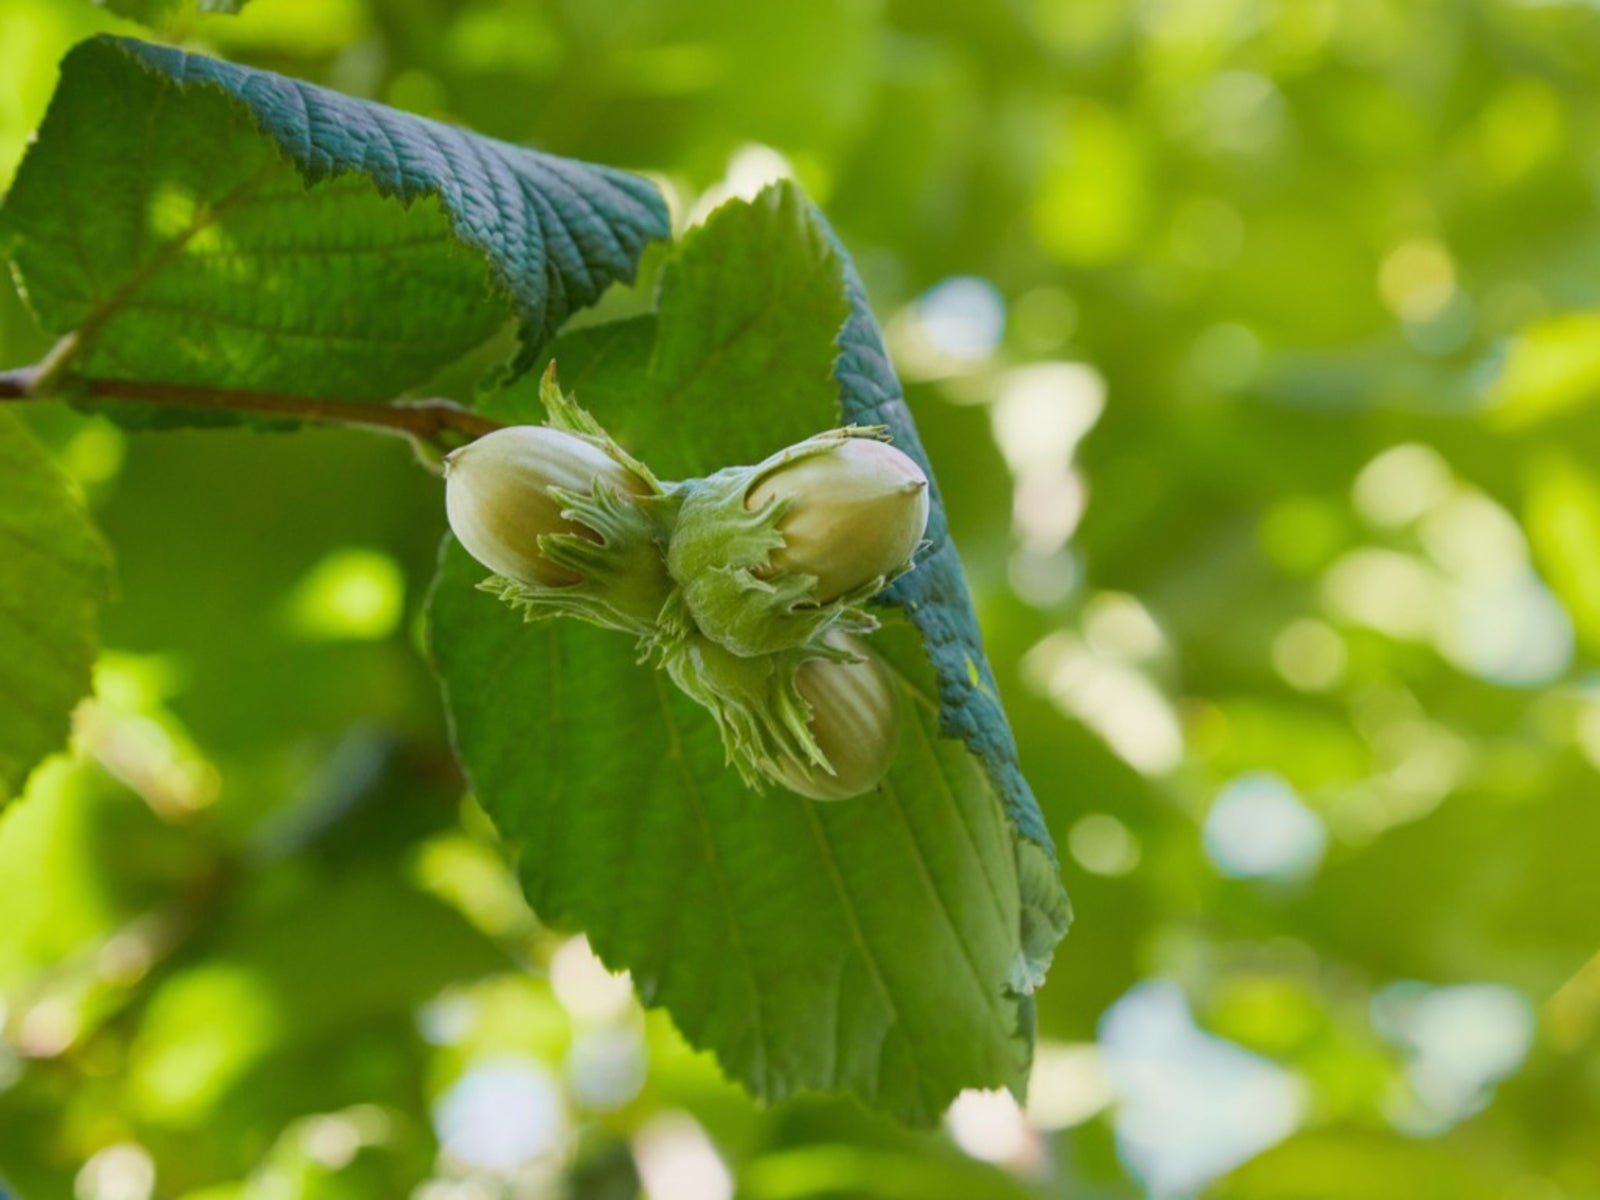 hazelnut care - learn more about growing hazelnuts and filberts